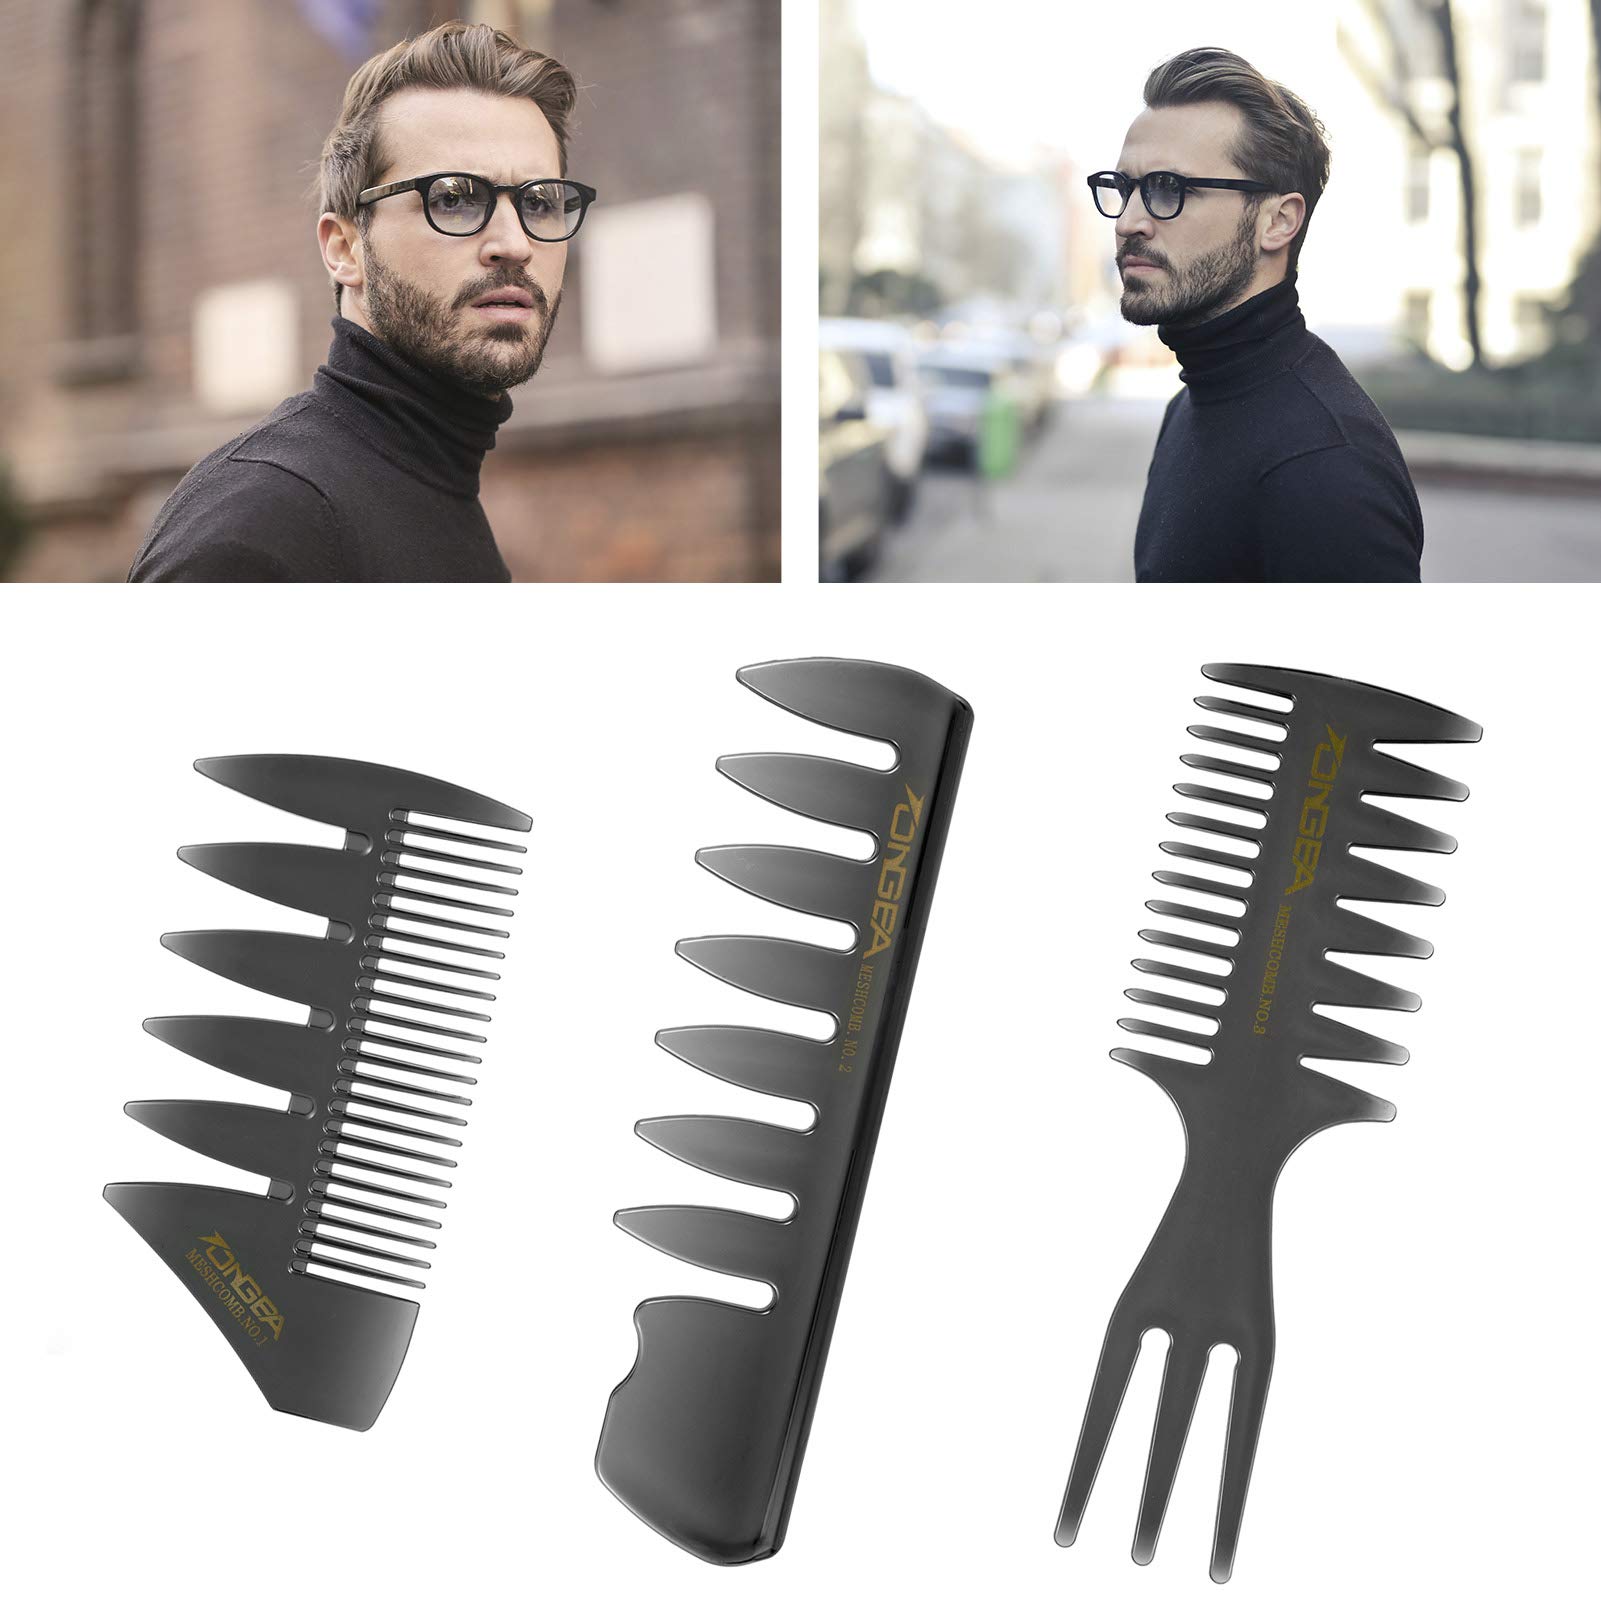 Mua Phoetya 3pcs Professional Styling Comb Set, Retro Wide Tooth Comb Hair  Comb Styling Men Detangler Hair Brush Hair Care Set Hairdresser Accessories  for Shower Long Curly Thick Hair trên Amazon Đức